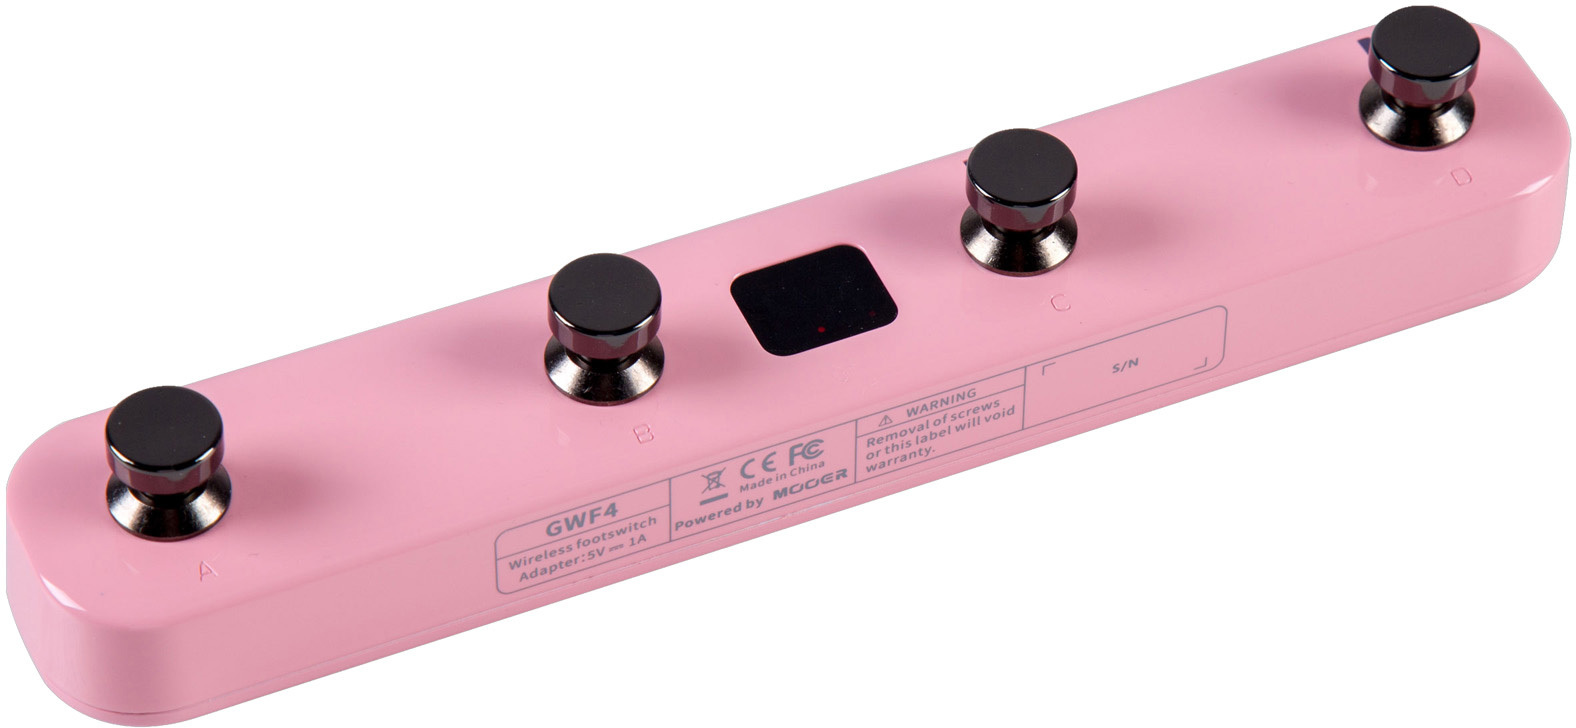 Mooer Gwf4 Gtrs Wireless Footswitch Shell Pink - PÉdale Volume / Boost. / Expression - Main picture